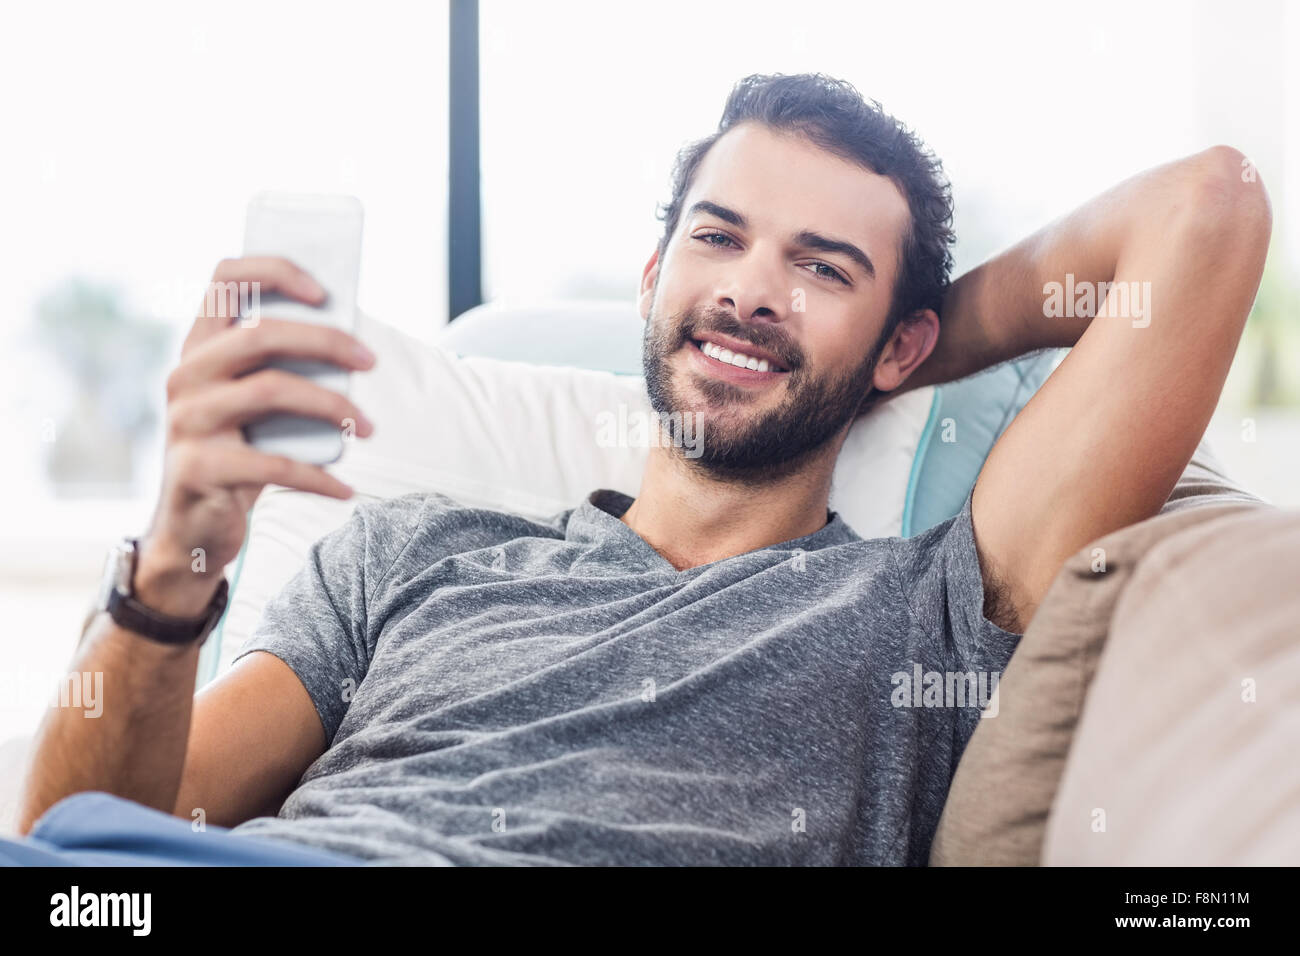 Attractive man using smartphone Banque D'Images